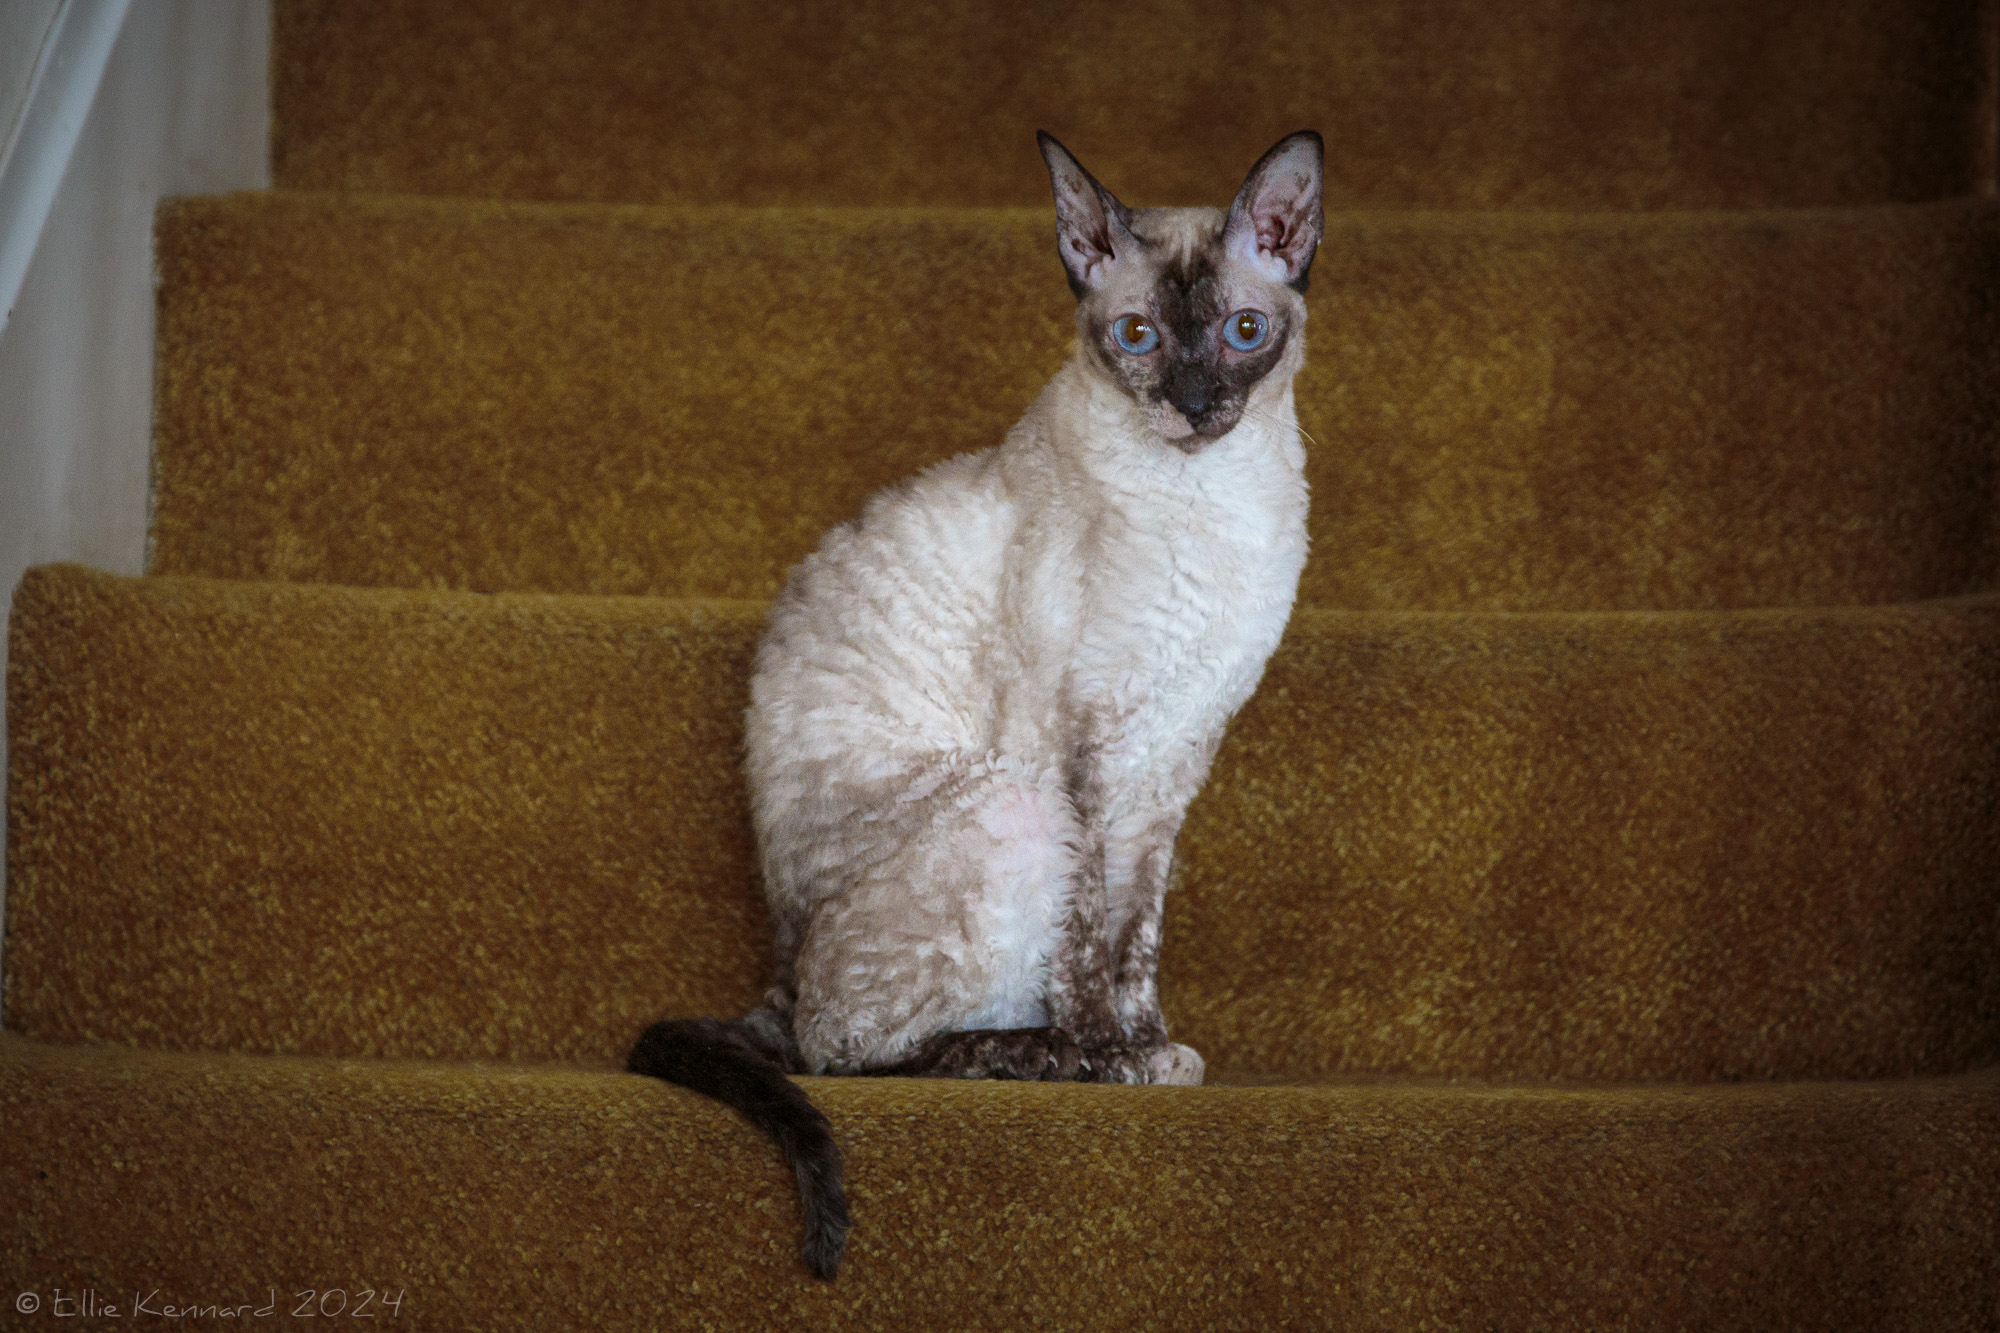 A curly coated tortie siamese marked cat with cream, brown and black fur and blue eyes is sitting on a carpetted stair looking directly at the camera. Her tail is curved over the edge of the stair.